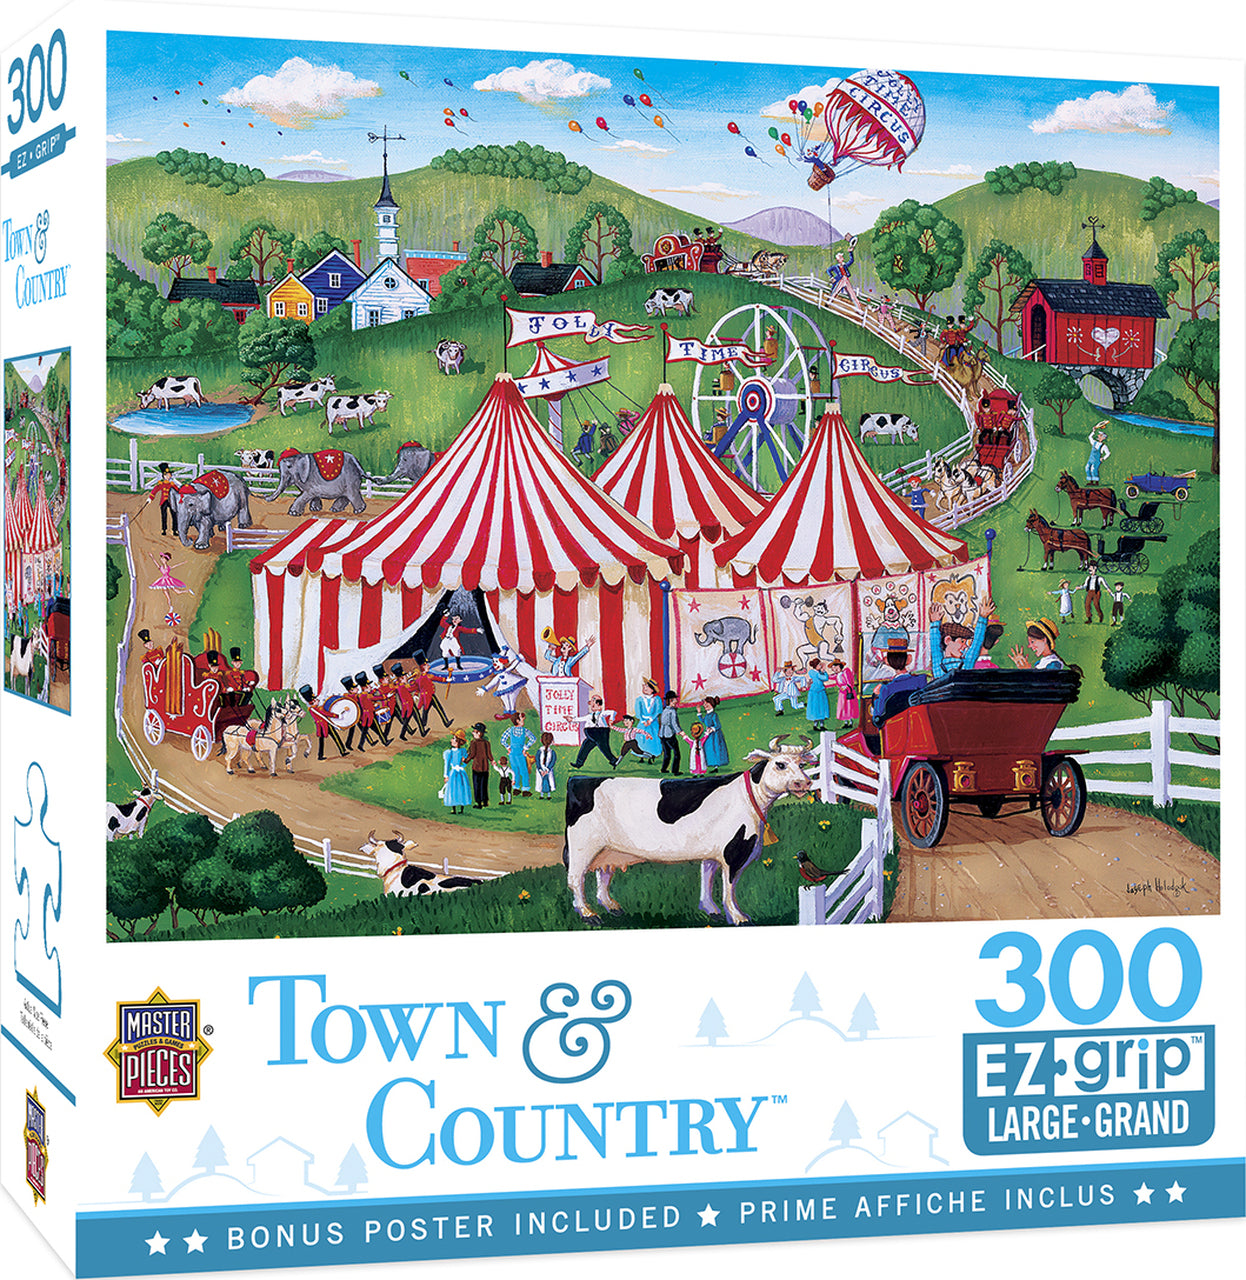 Town & Country - Jolly Time Circus - Large 300 Piece EZGrip Jigsaw Puzzle by Masterpieces